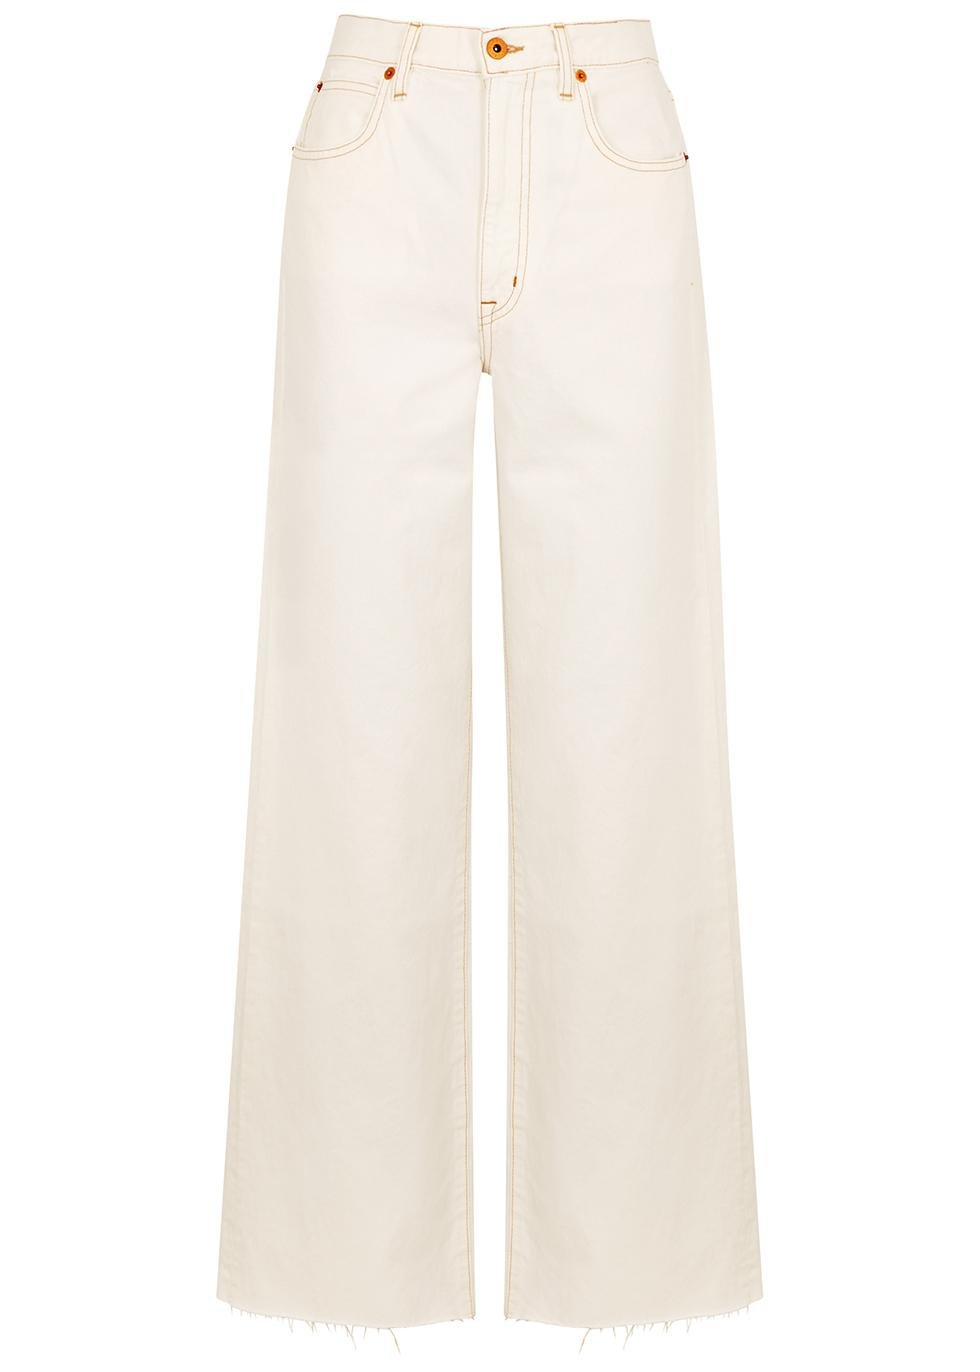 Grace off-white wide-leg jeans by SLVRLAKE | jellibeans